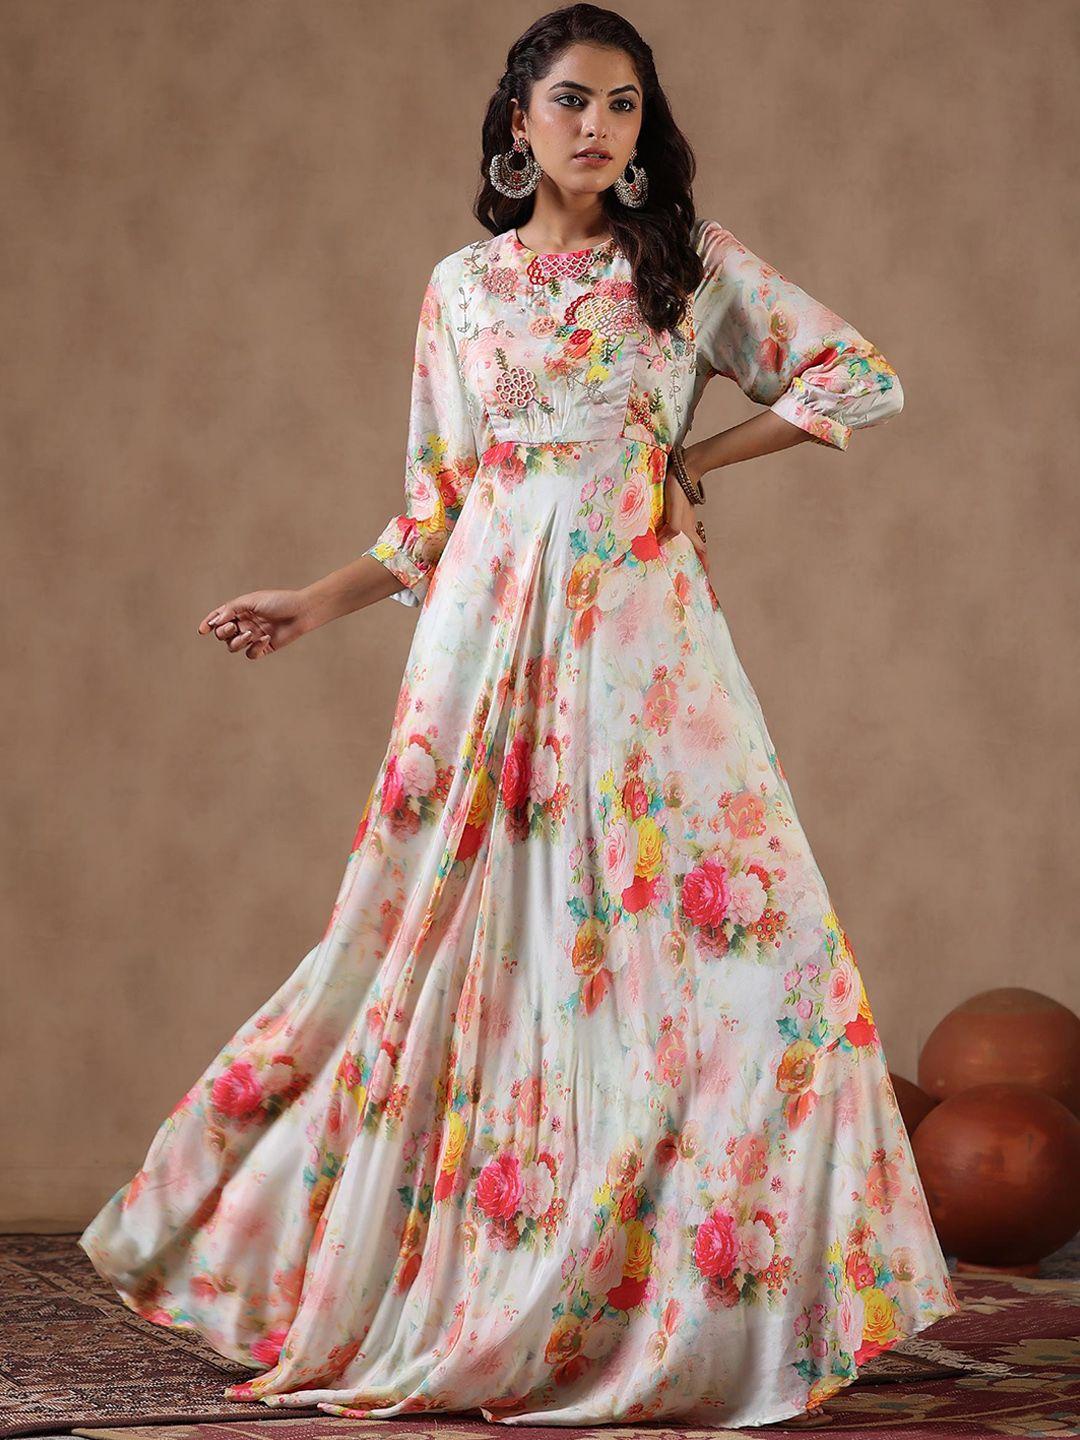 scakhi floral printed cuffed sleeves embellished satin silk empire ethnic dress